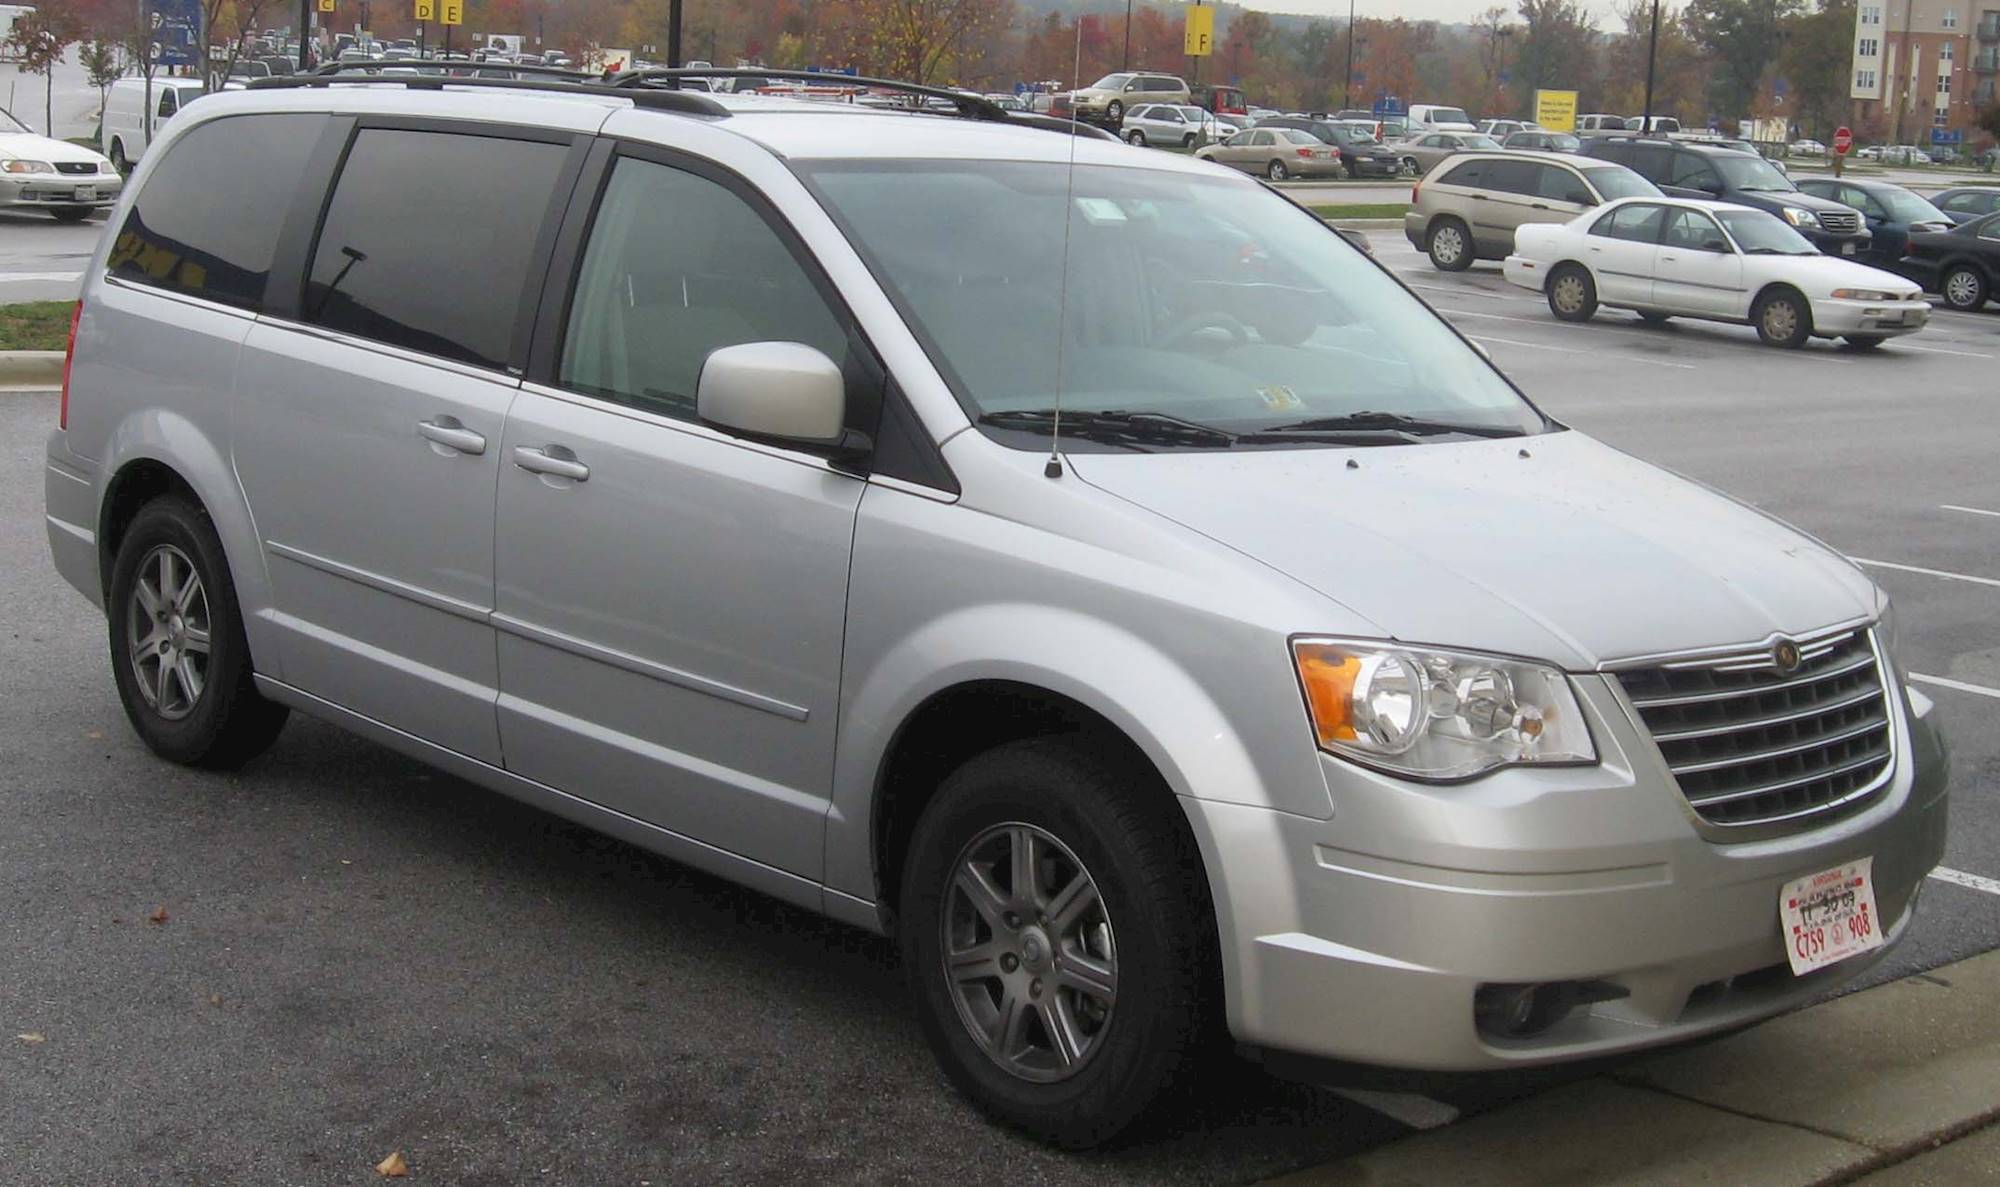 2008 Chrysler Town and Country LX Passenger Minivan 3.3L